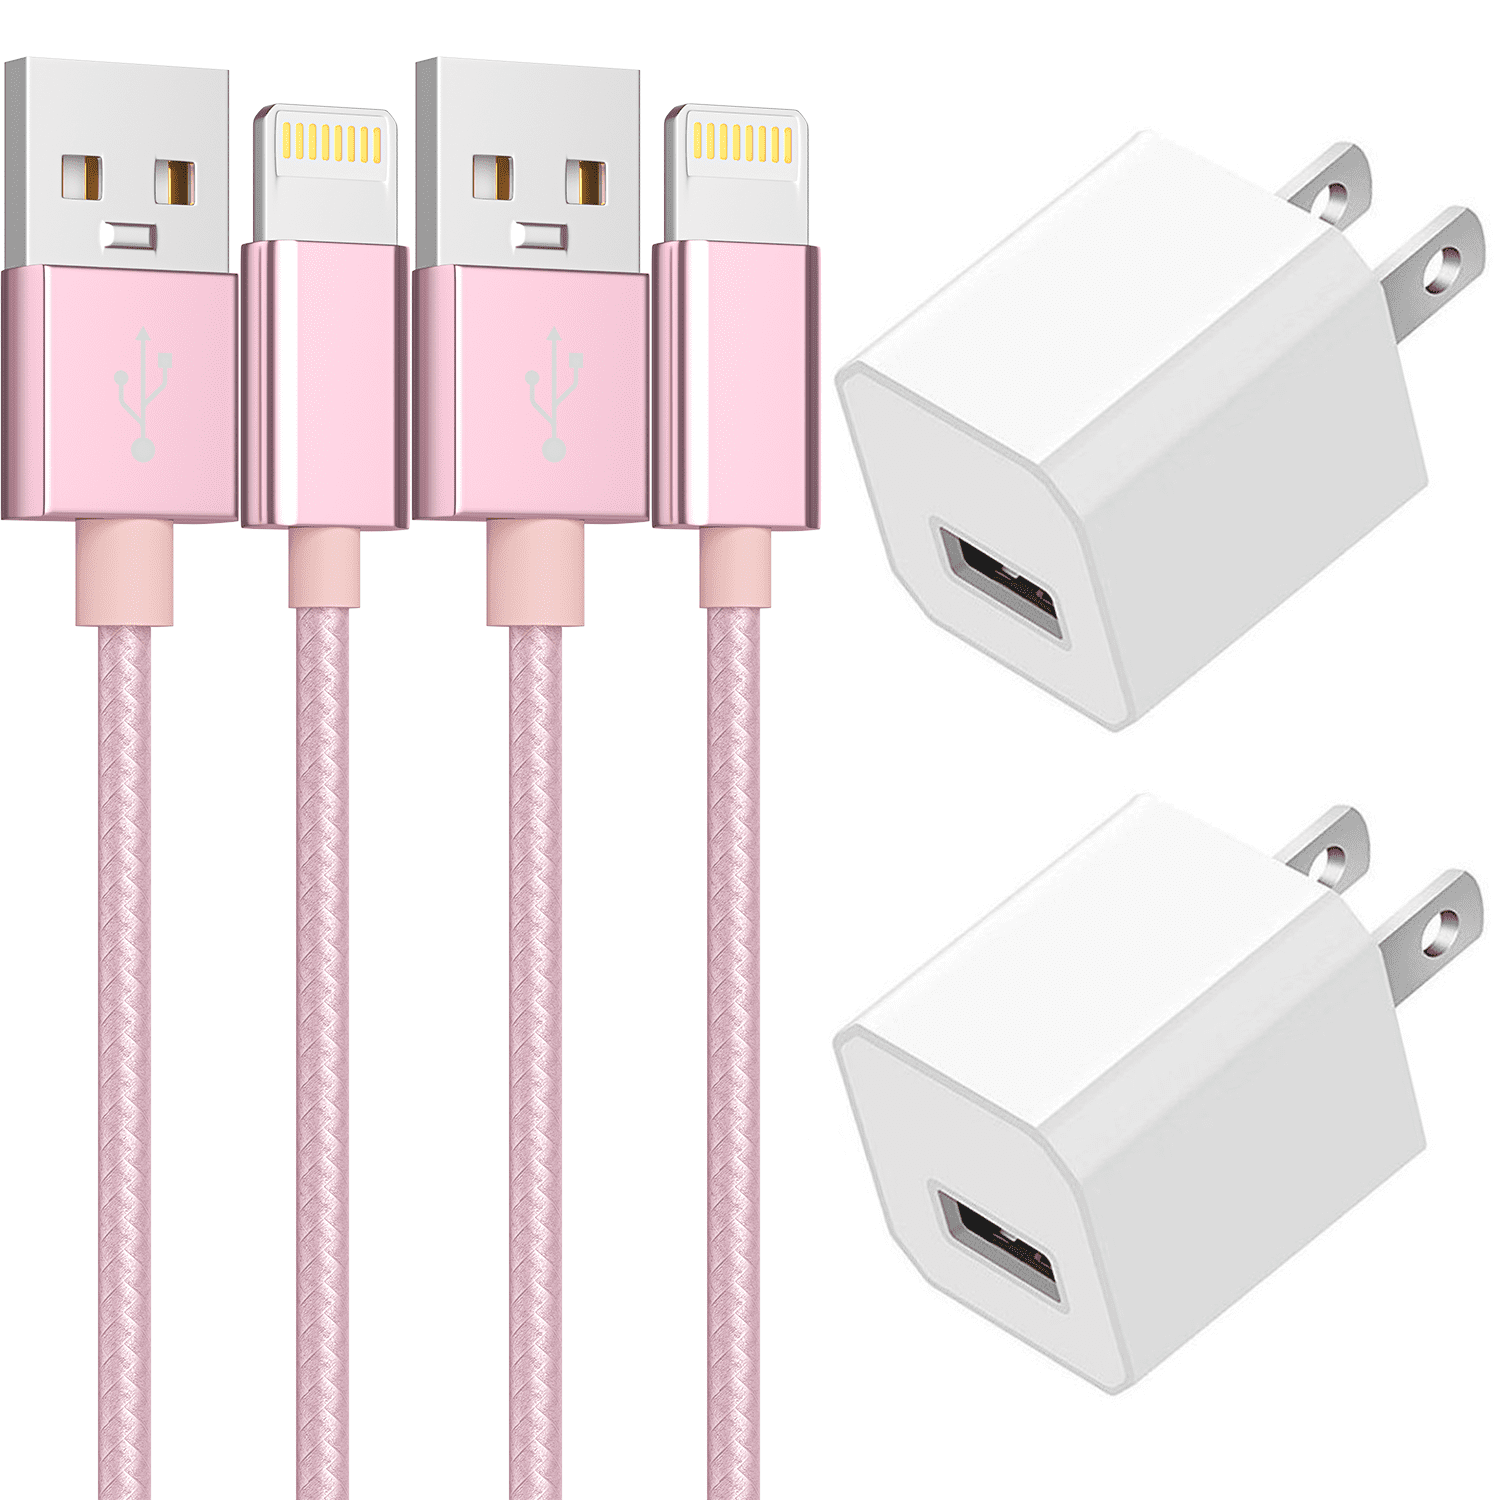 Chargers 5W USB Power Adapter Wall Charger 1A Cube for Plug Outlet w/ 6FT  Nylon Braided Charging Pad Cable Cord Compatible with iPhone X Case/8/8  Plus/7/7 Plus/6/6s/5s,iPad Mini (2-Pack) Pink - Walmart.com